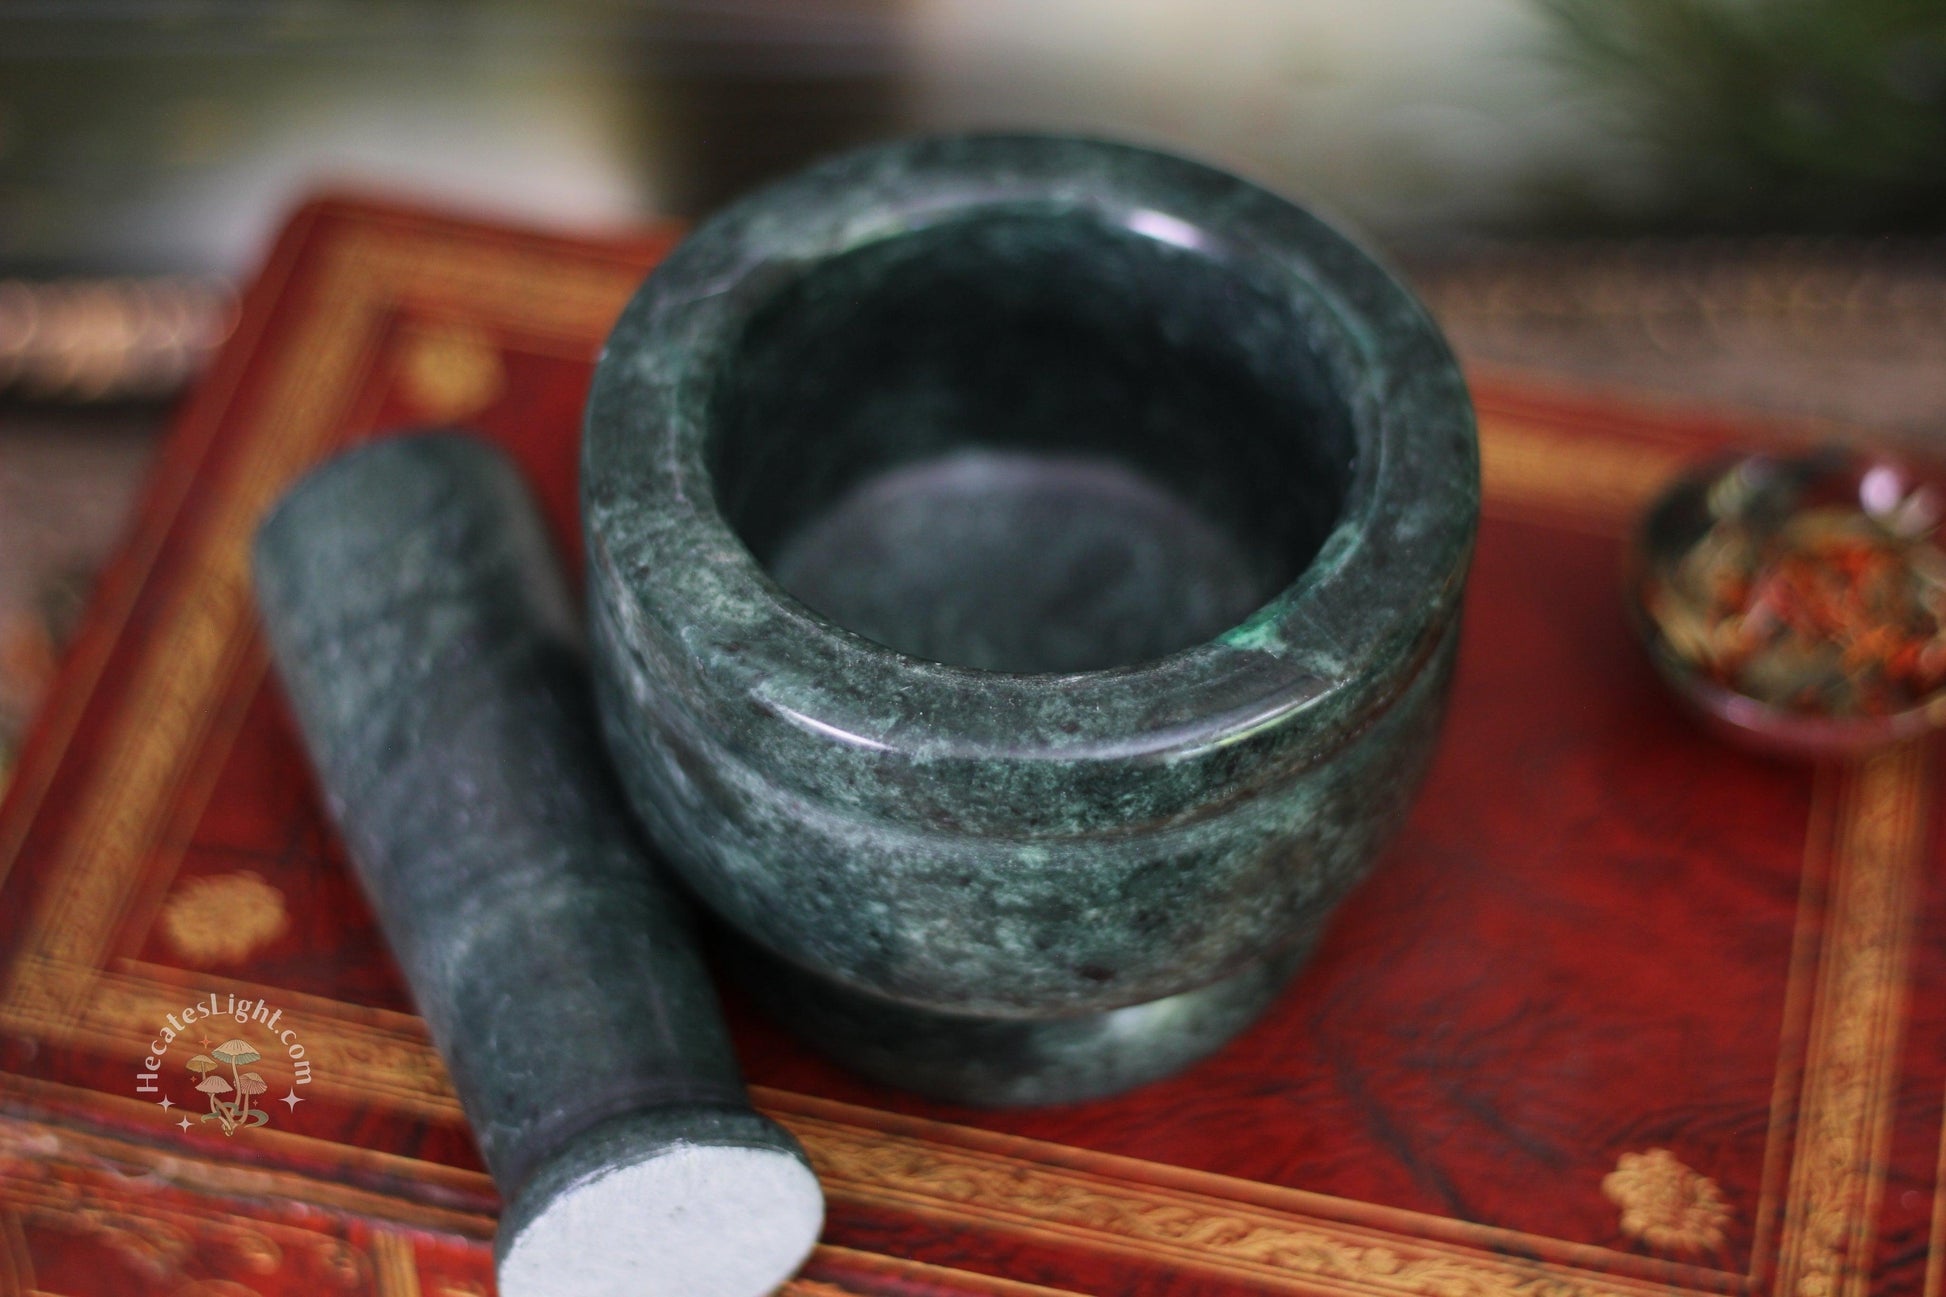 Green Marble Mortar & Pestle Hecate's Light green, green grinder, marble, mortar, mortar and pestle, pestle Green Marble Mortar & Pestle Hecate's Light green, green grinder, marble, mortar, mortar and pestle, pestle metaphysical occult supplies witchy hecateslight.com witchcraft cottagecore witch gifts metaphysical occult supplies witchy hecateslight.com witchcraft cottagecore witch gifts